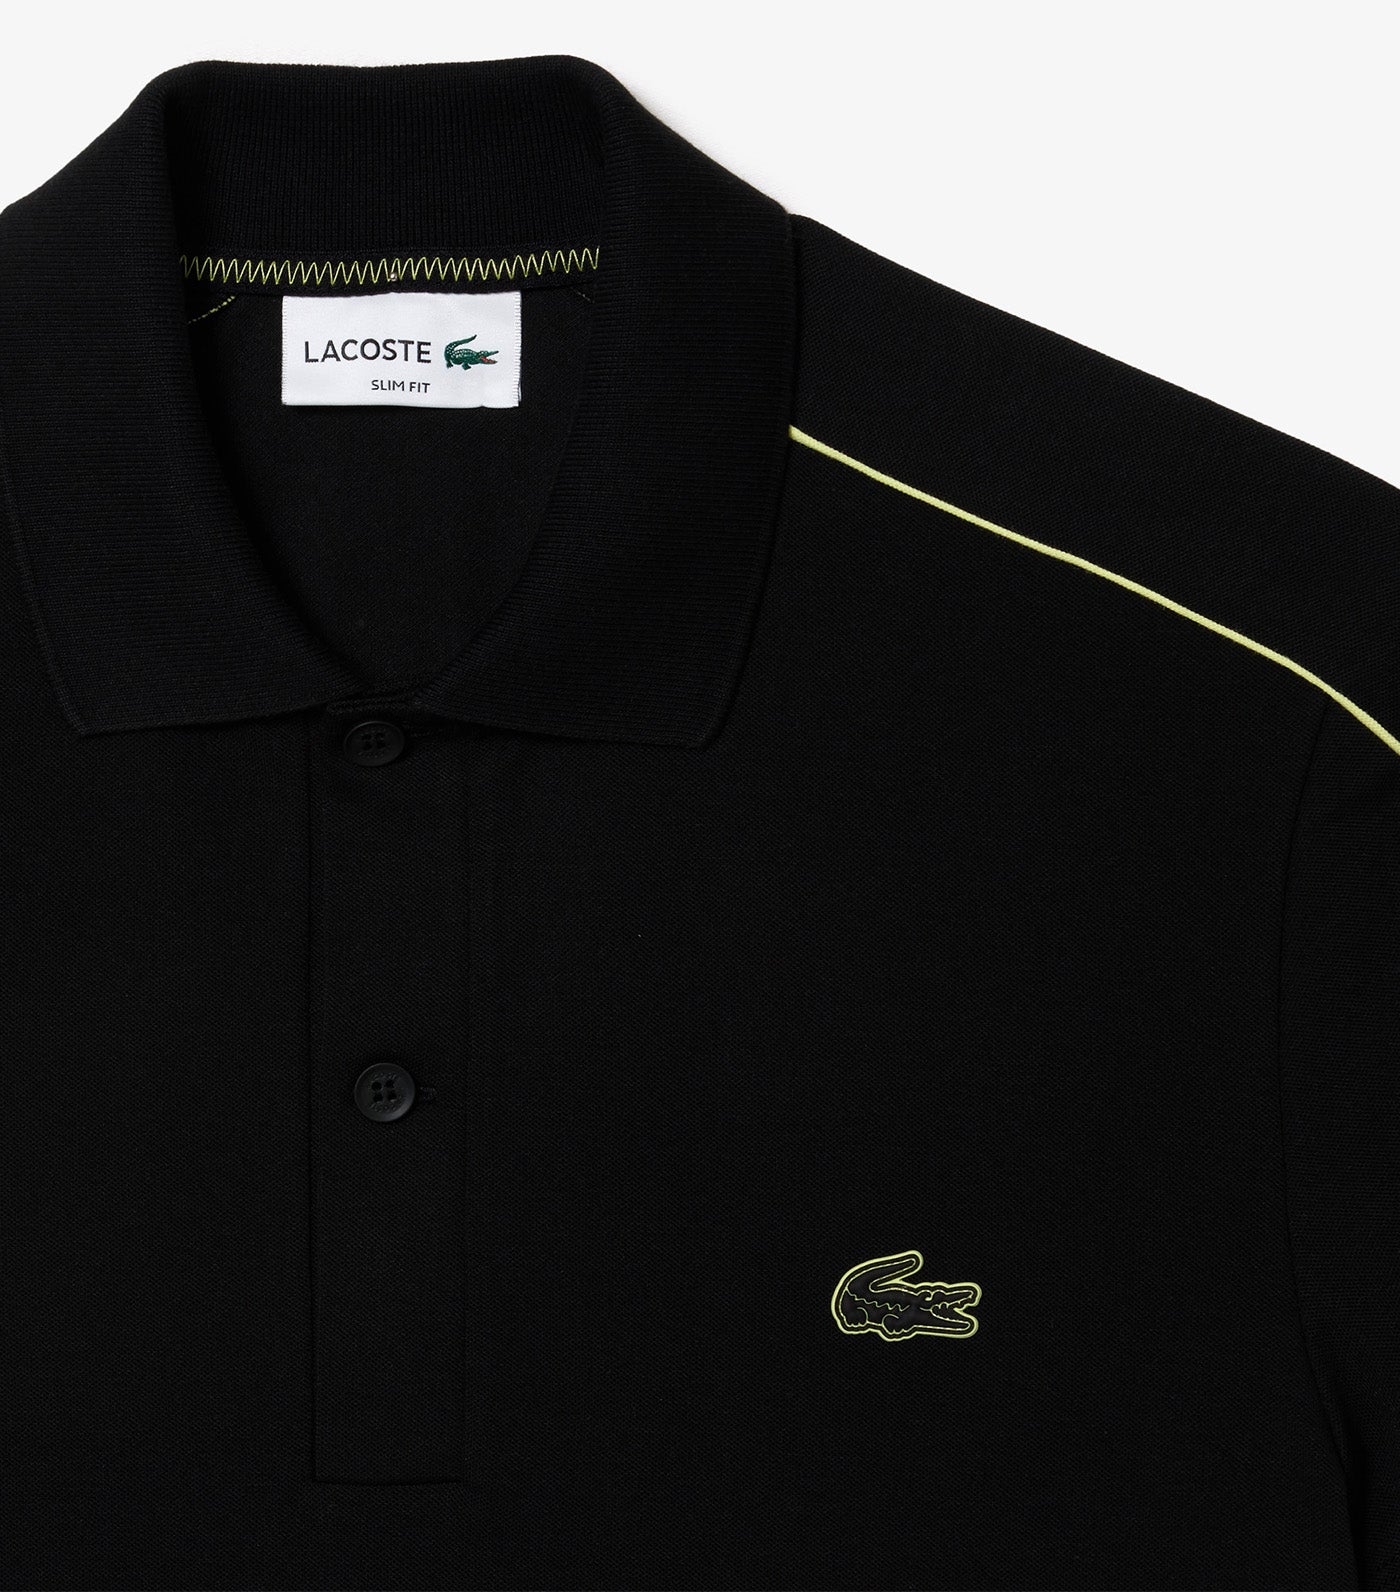 Contrast Accent Lacoste Print Polo Shirt Black/Limeira